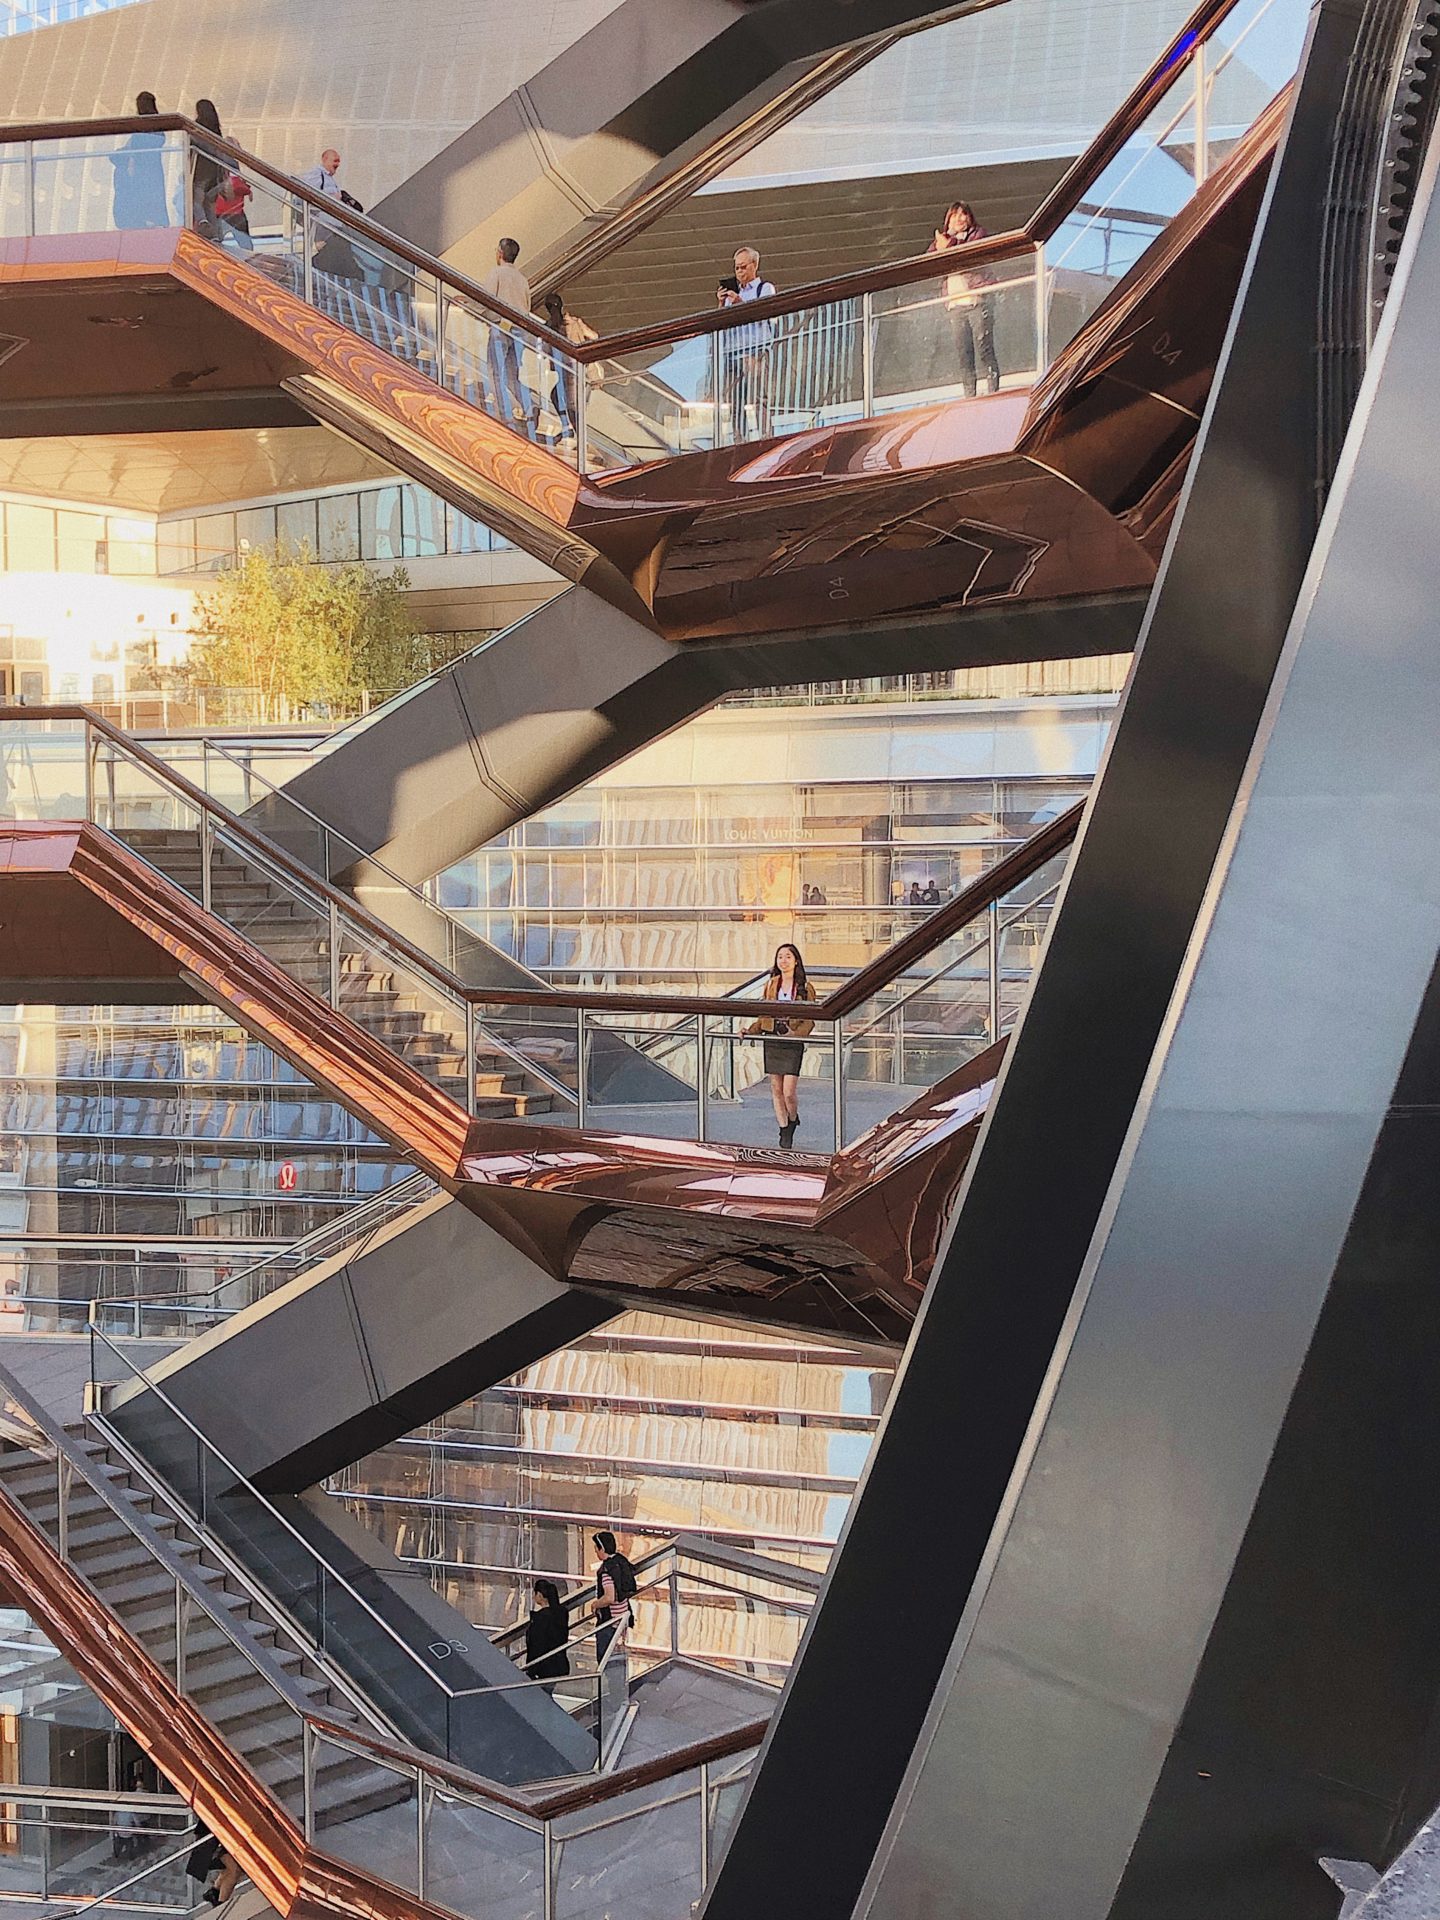 The view of the Vessel in Hudson Yards at New York City